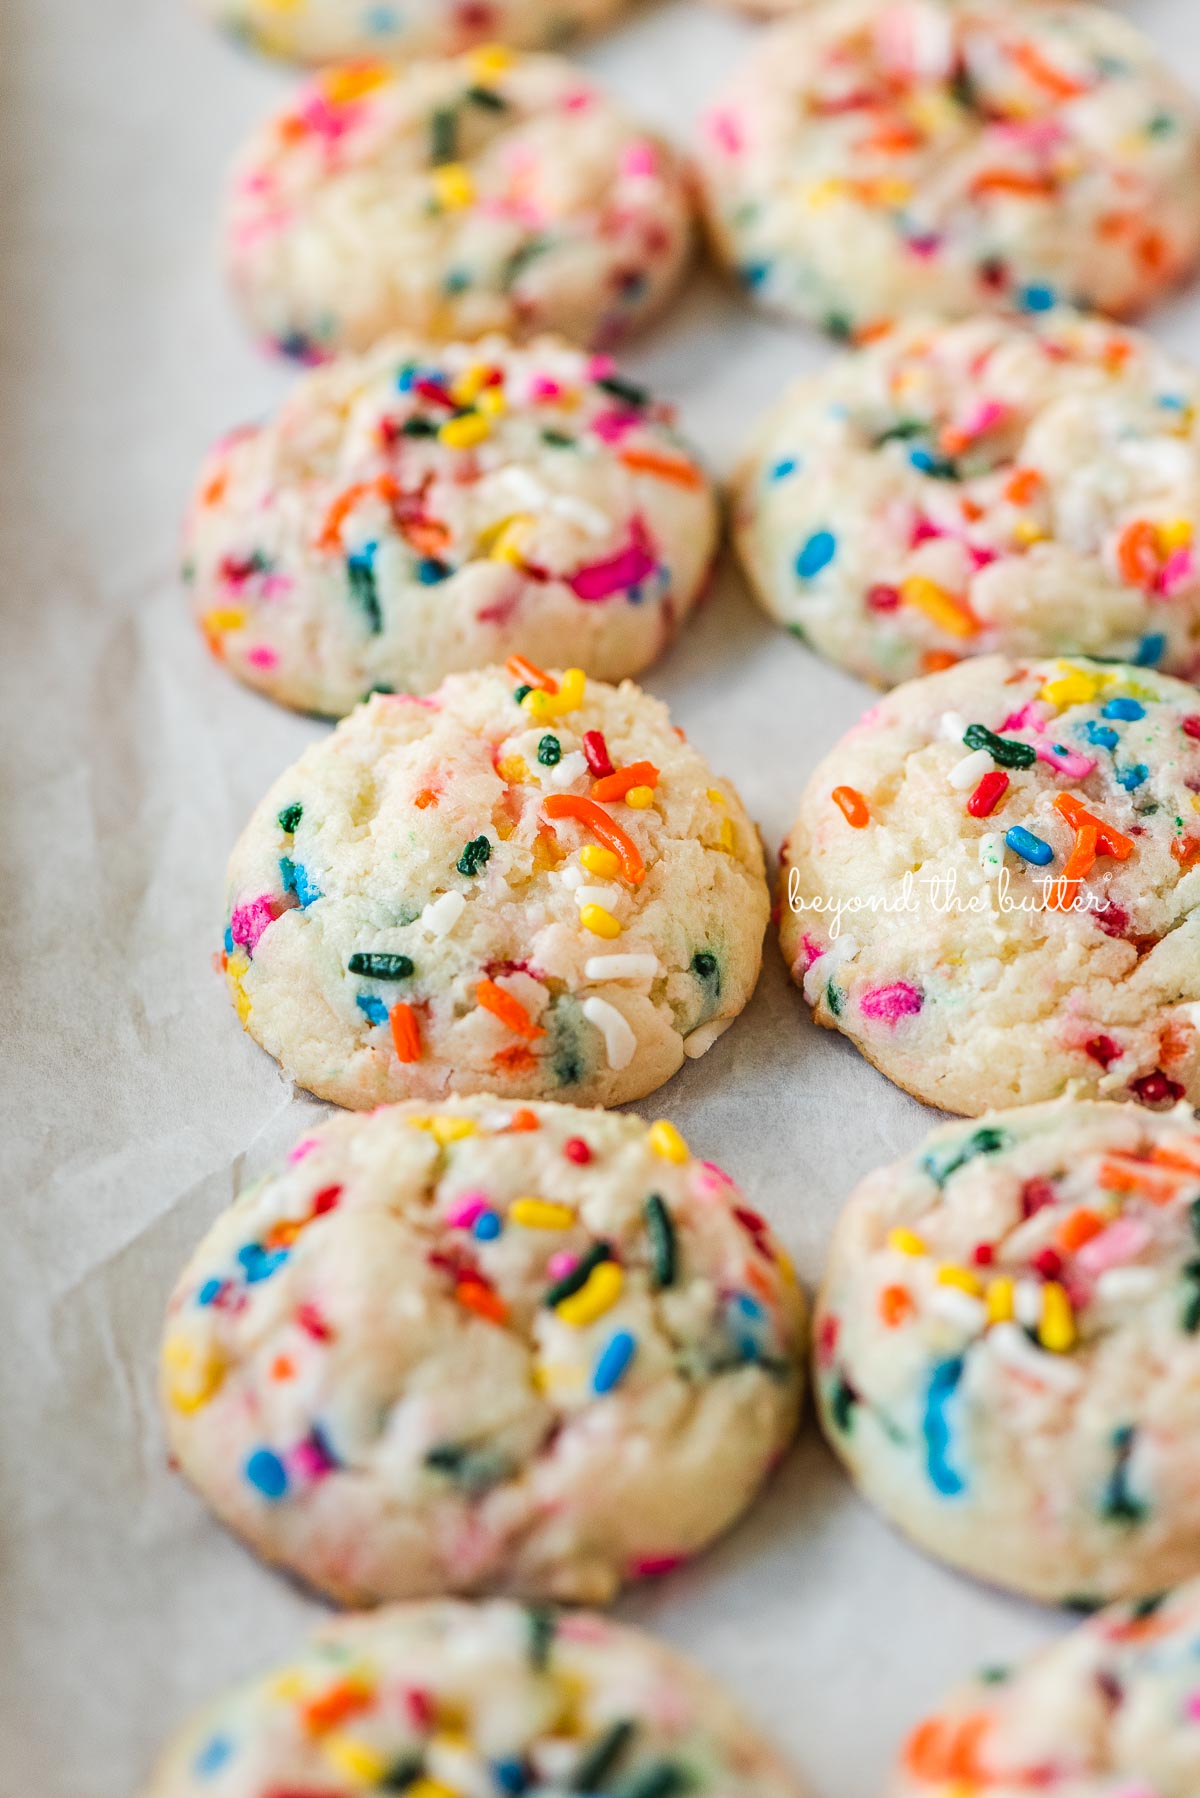 Parchment paper lined baking sheet with rows of gooey funfetti butter cookies.